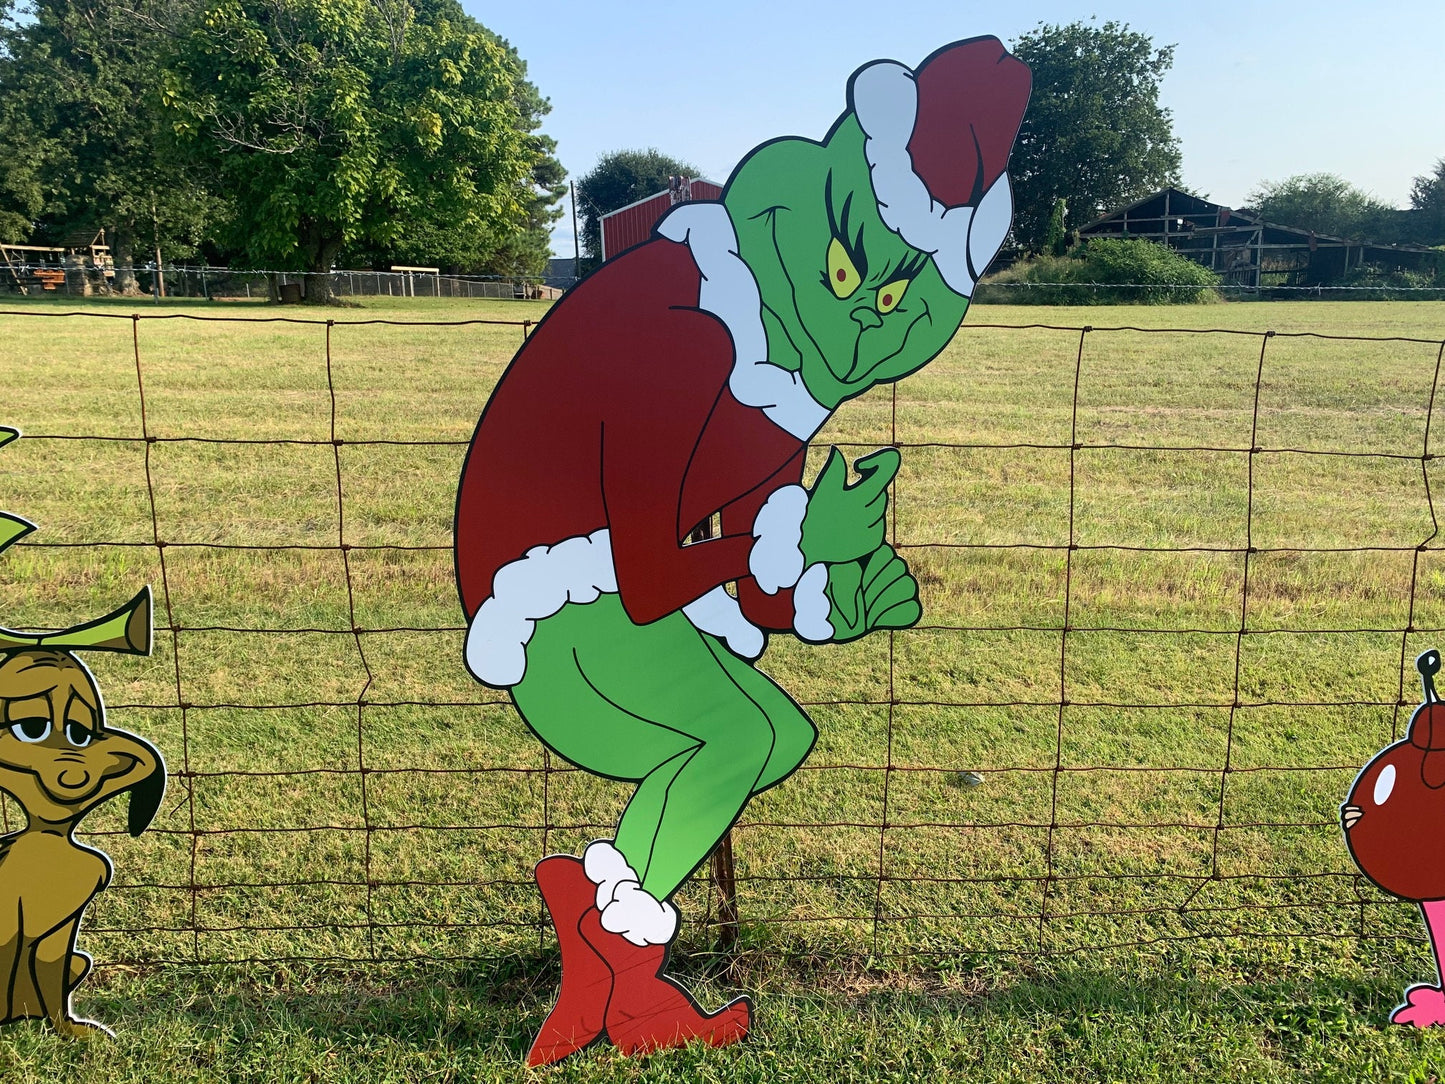 Extra-Large Christmas Yard Art Fast & Free shipping 72” inches!